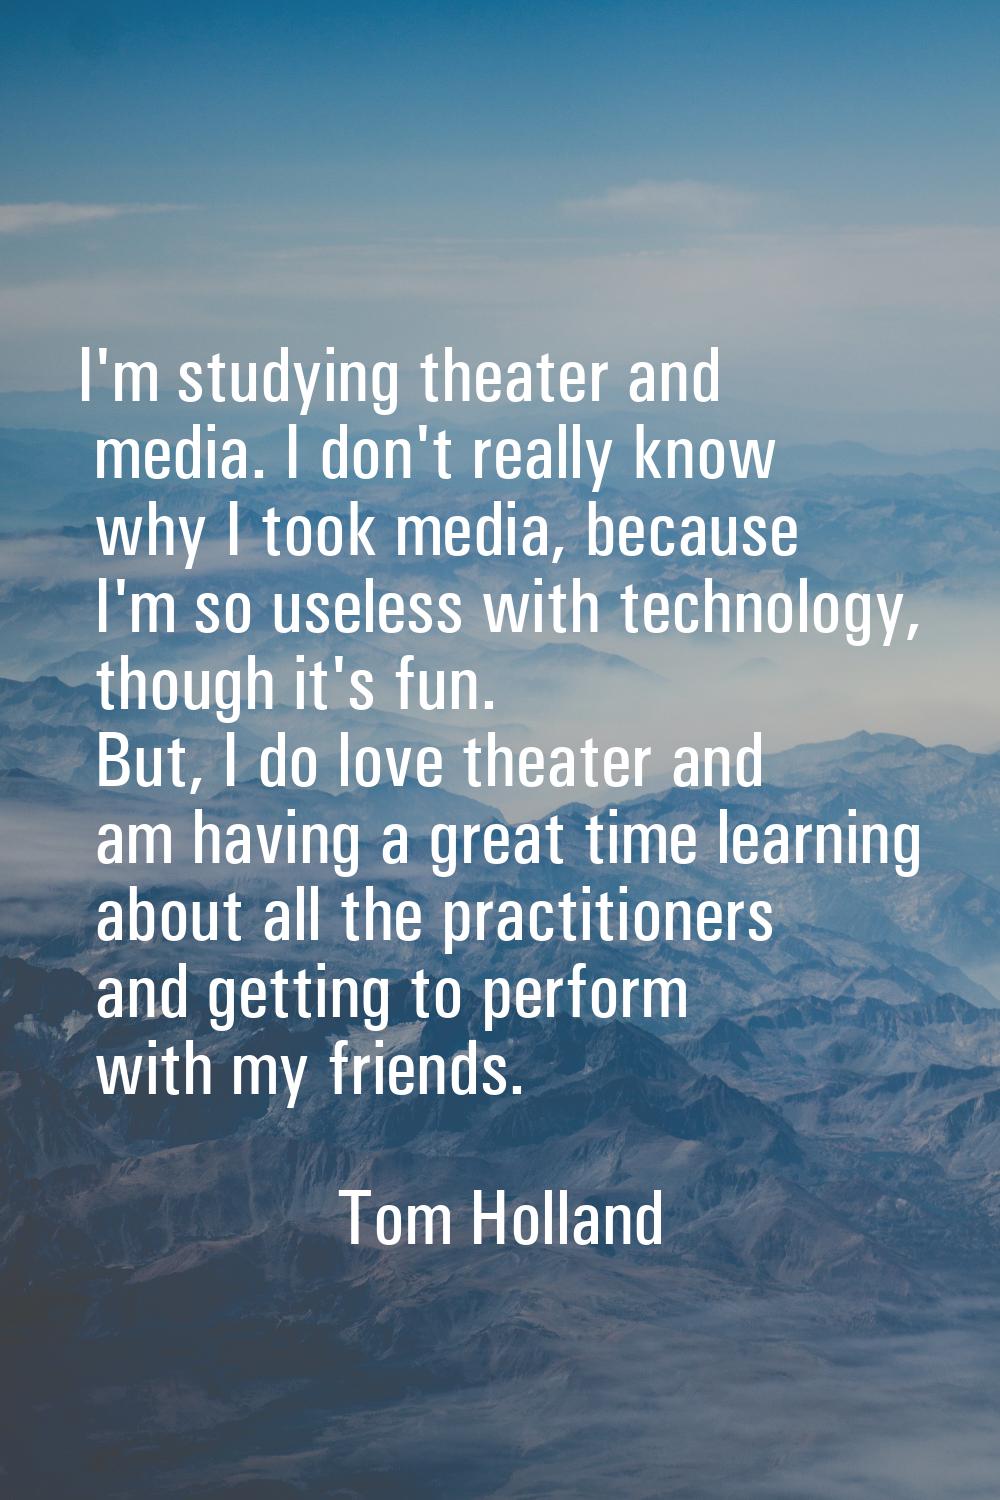 I'm studying theater and media. I don't really know why I took media, because I'm so useless with t